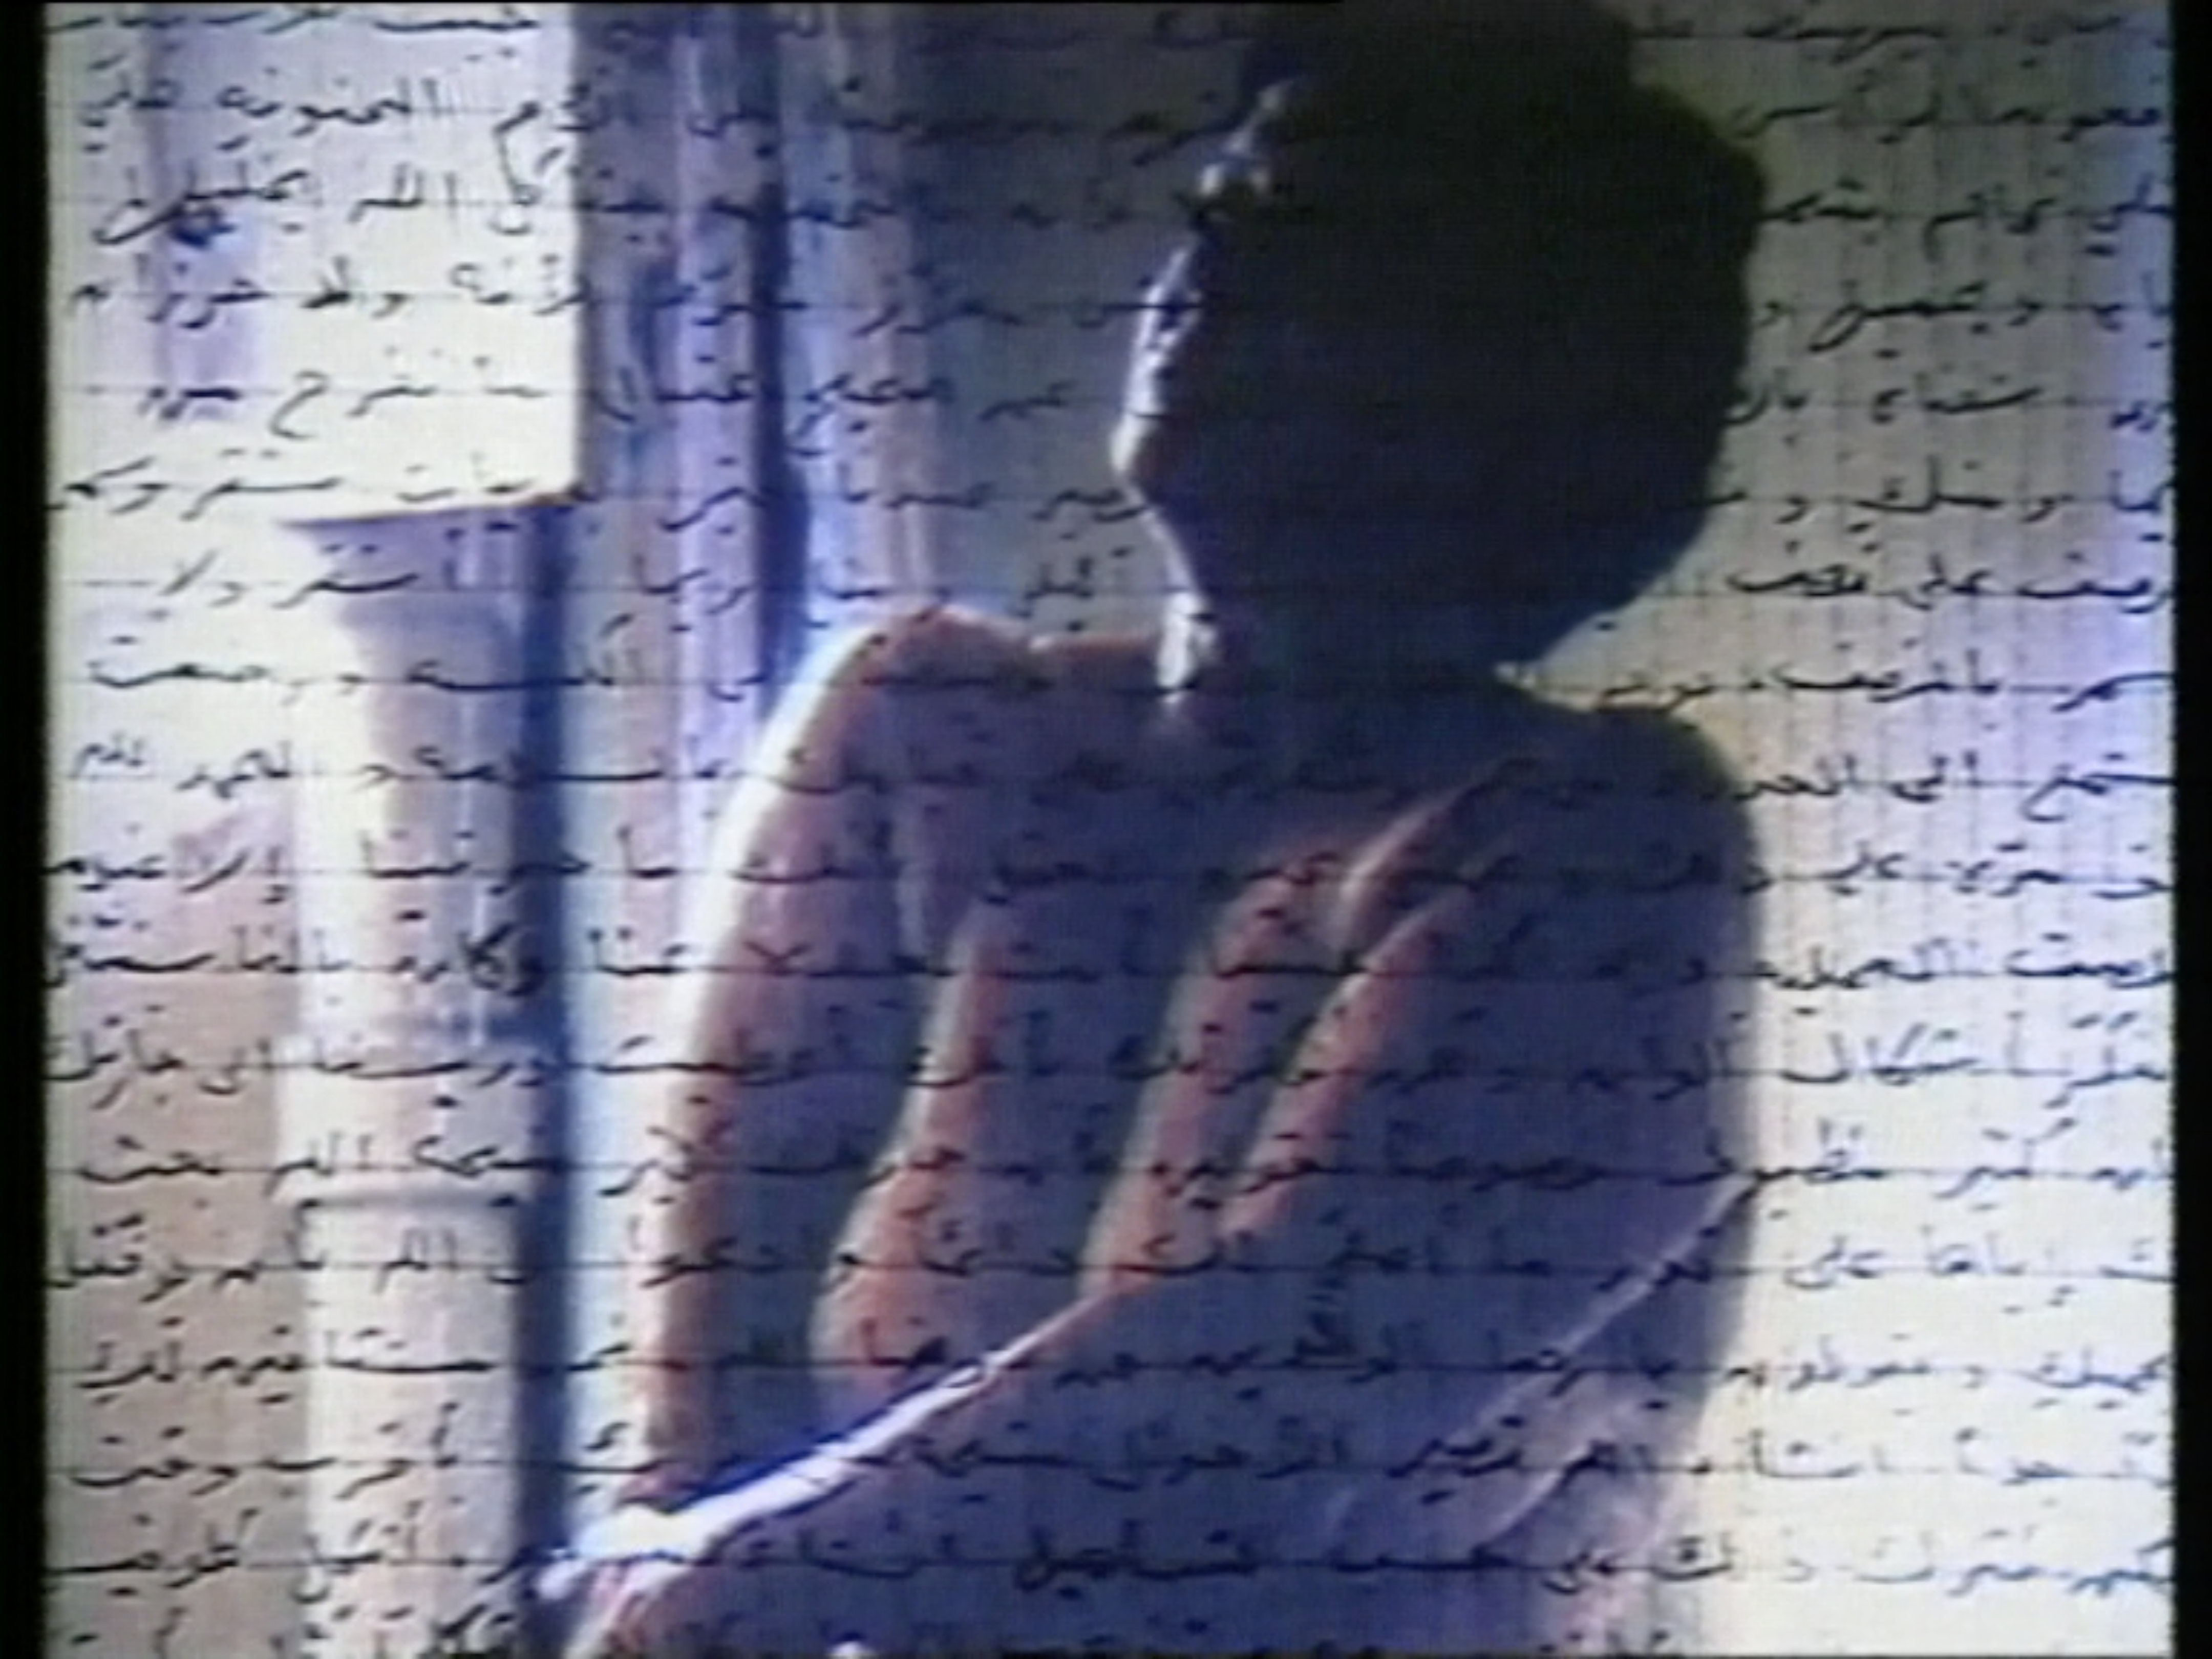 A still from measures of distance by mona hatoum. A torso of a naked woman is overlaid by a handwritten letter in arabic. 